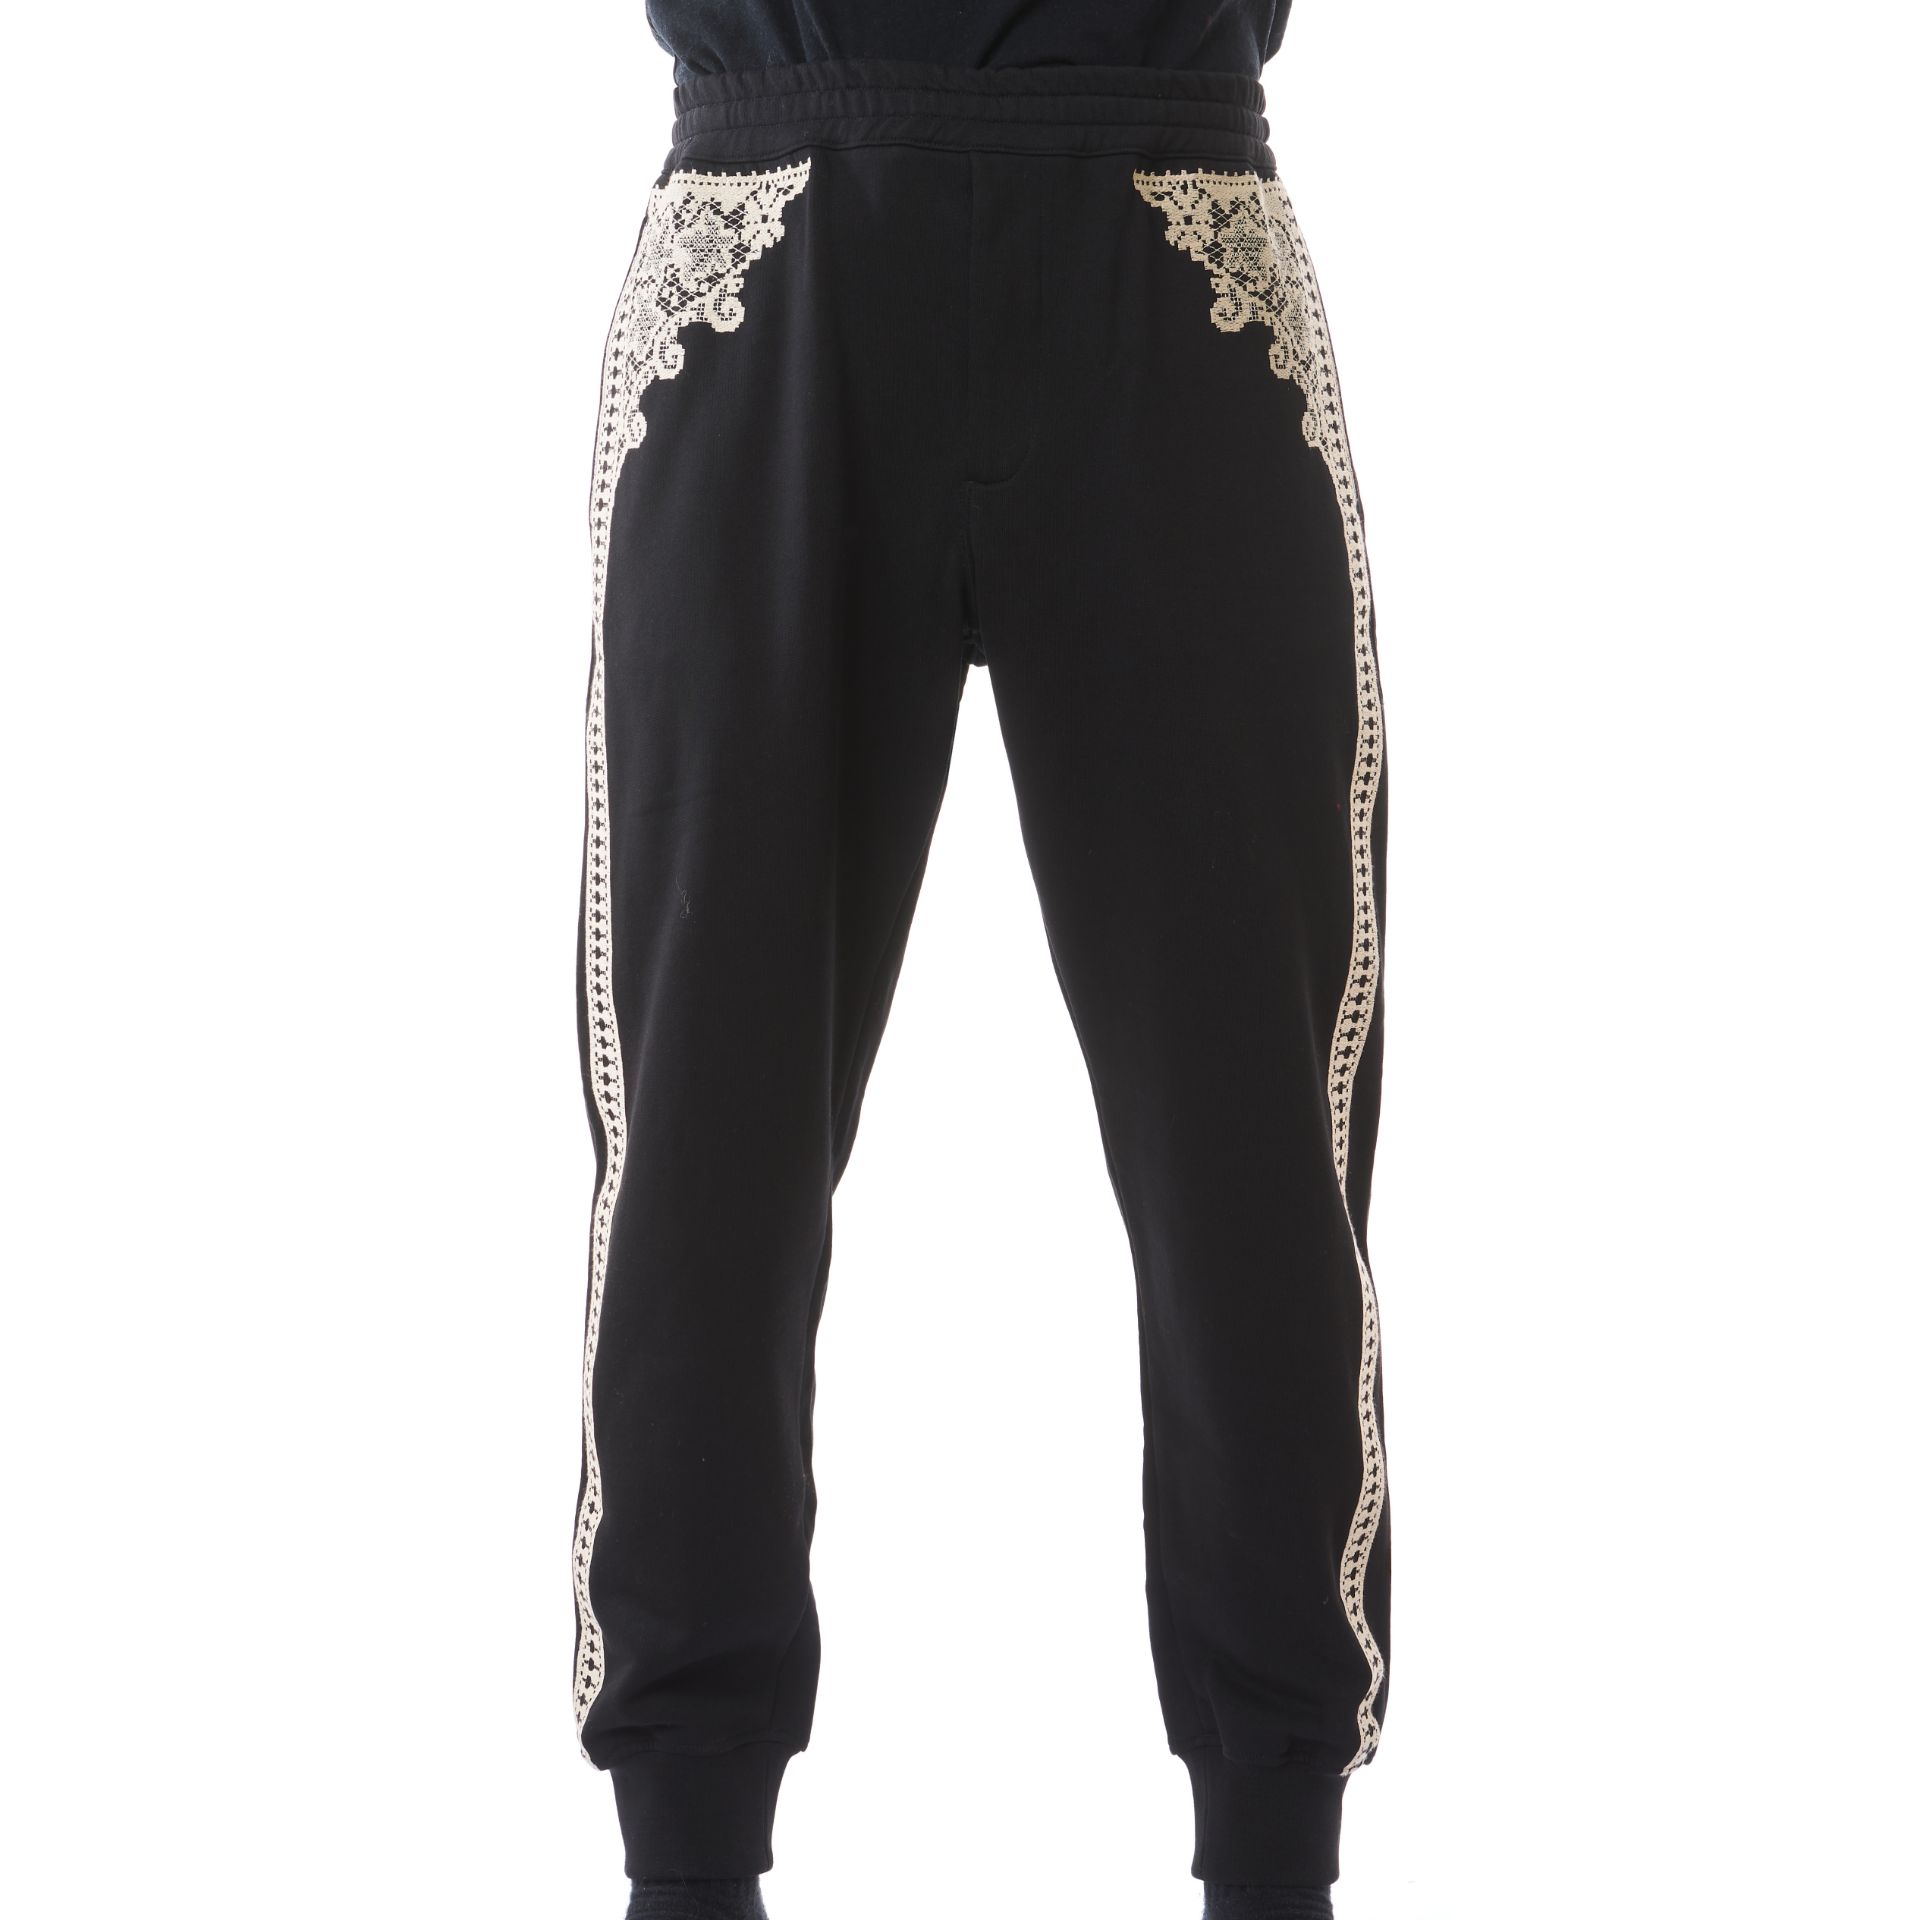 NO RESERVE TWO PAIRS OF ALEXANDER MCQUEEN JOGGERS - Image 3 of 8